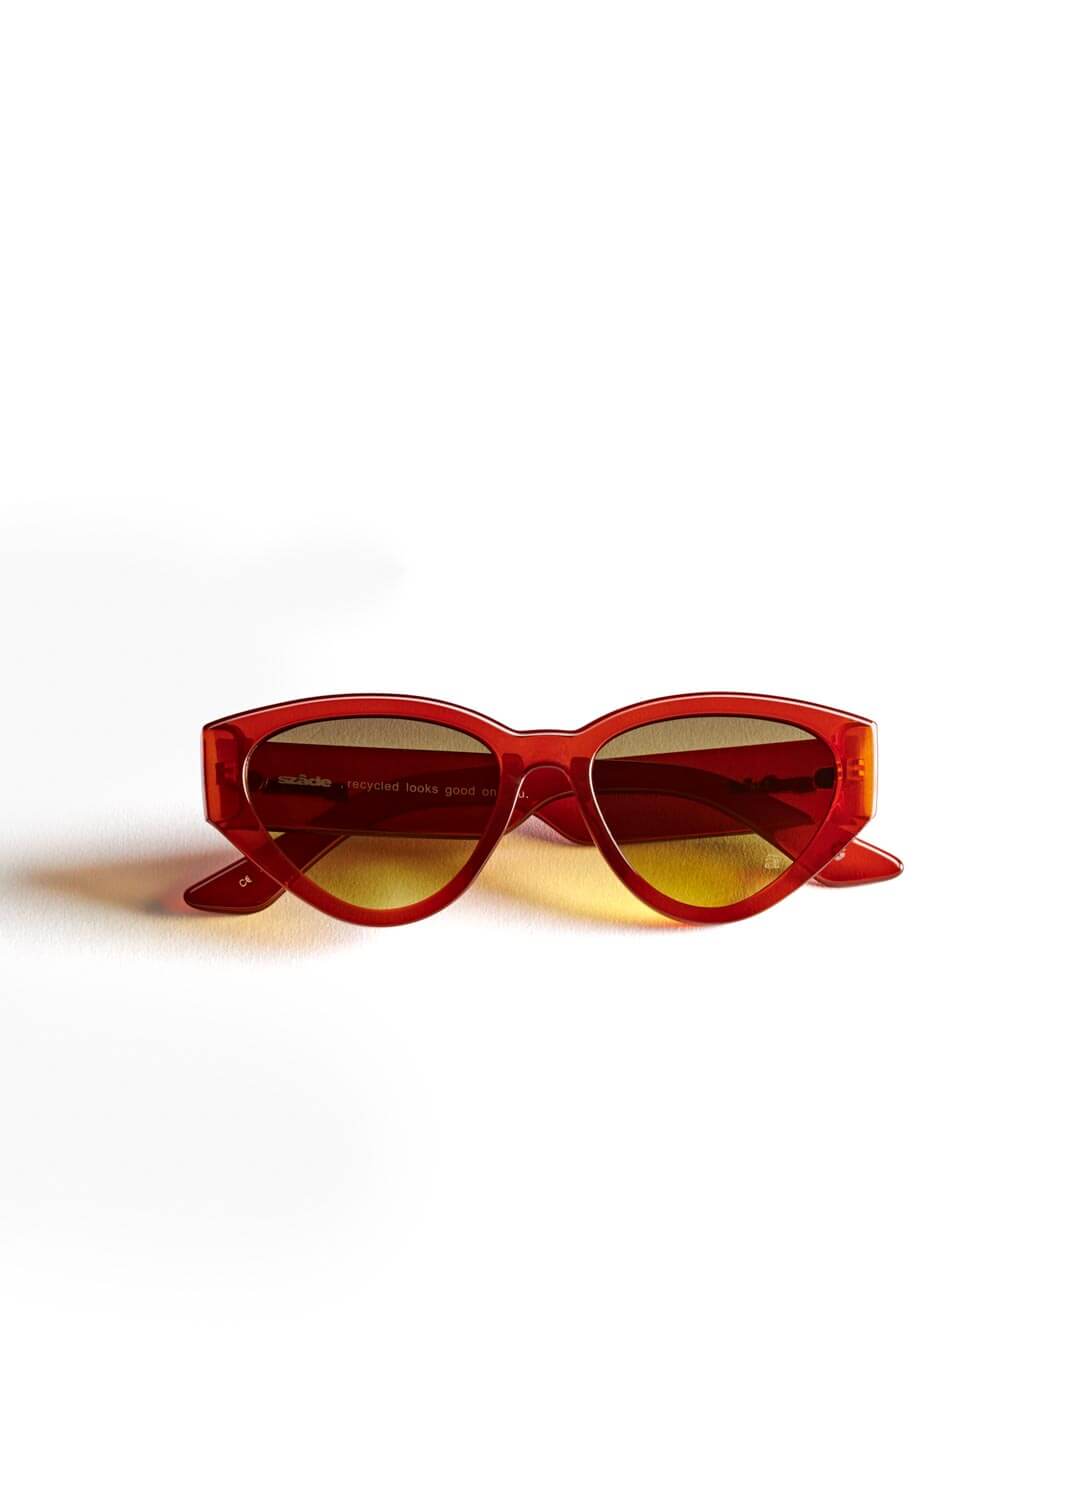 Szade RECYCLED SUNGLASSES  Szade - Kershaw in Blood Plum/Unmellow Yellow